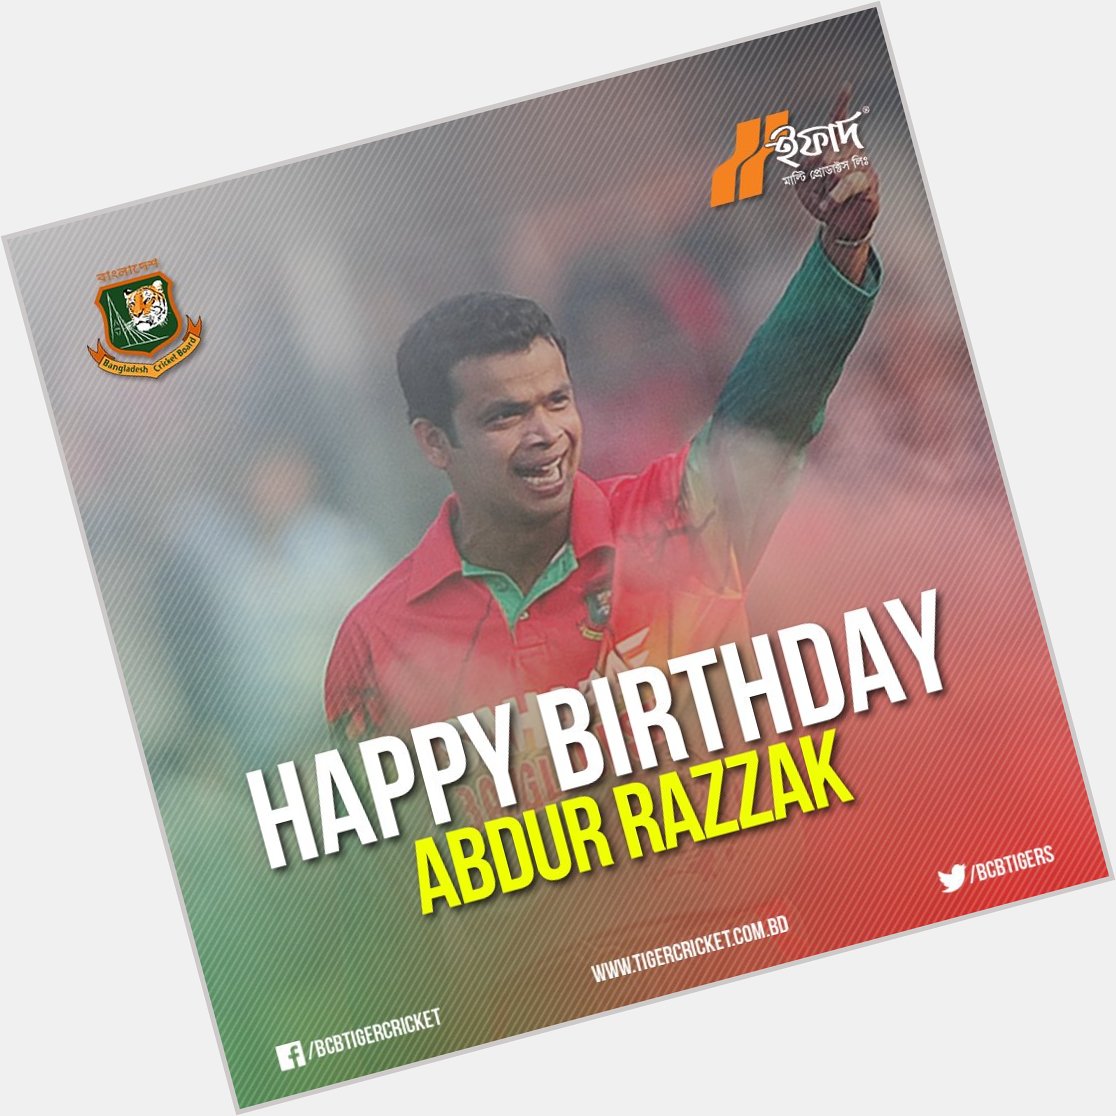 We wish a very Happy Birthday to our very own Abdur Razzak. Many Many happy returns of the day! 